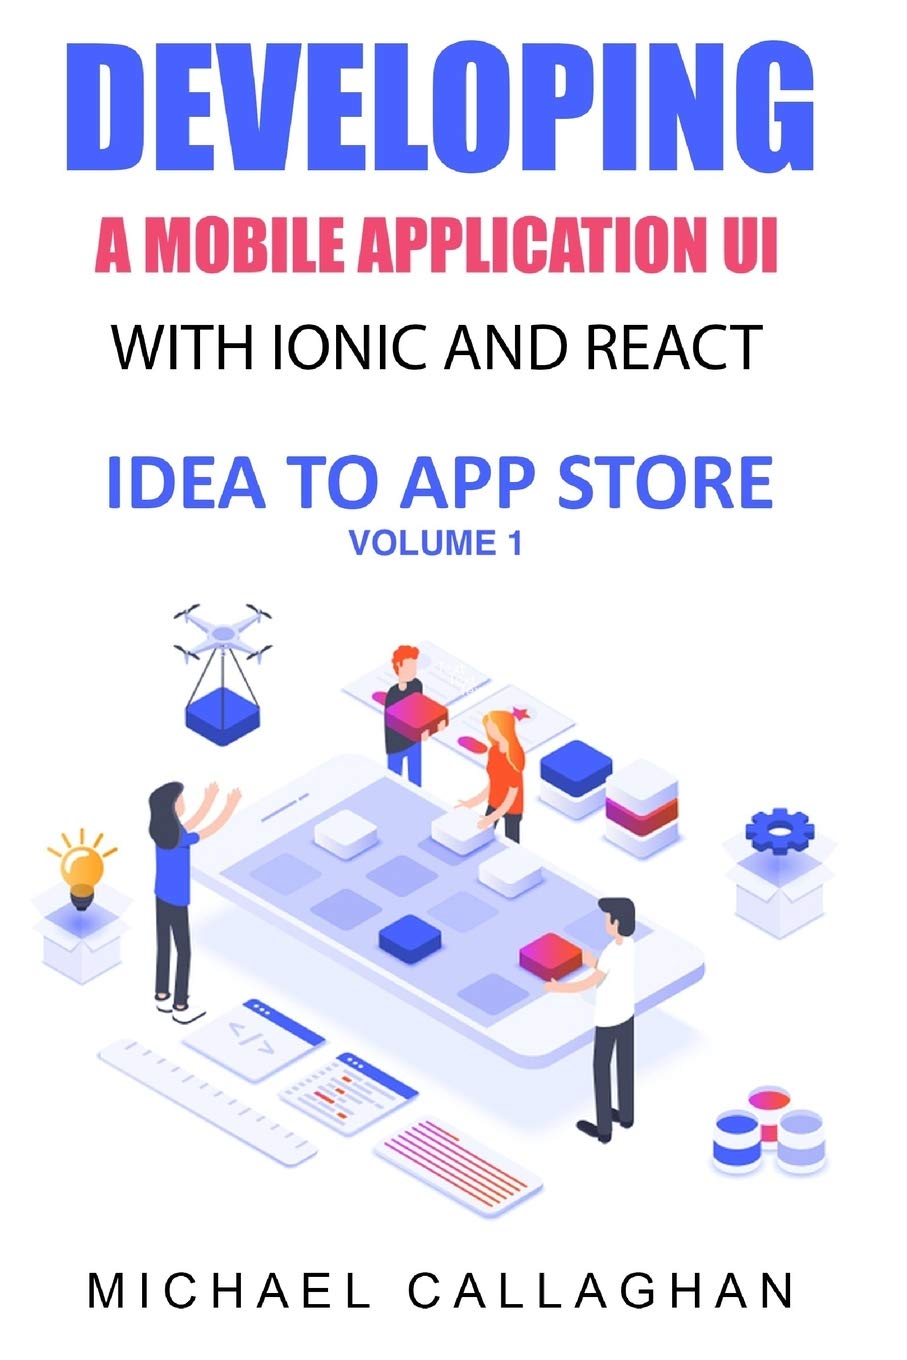 Developing a Mobile Application UI with Ionic and React: How to Build Your First Mobile Application with Common Web Technologies (Mobile App Development with Ionic Framework: Idea to App Store)